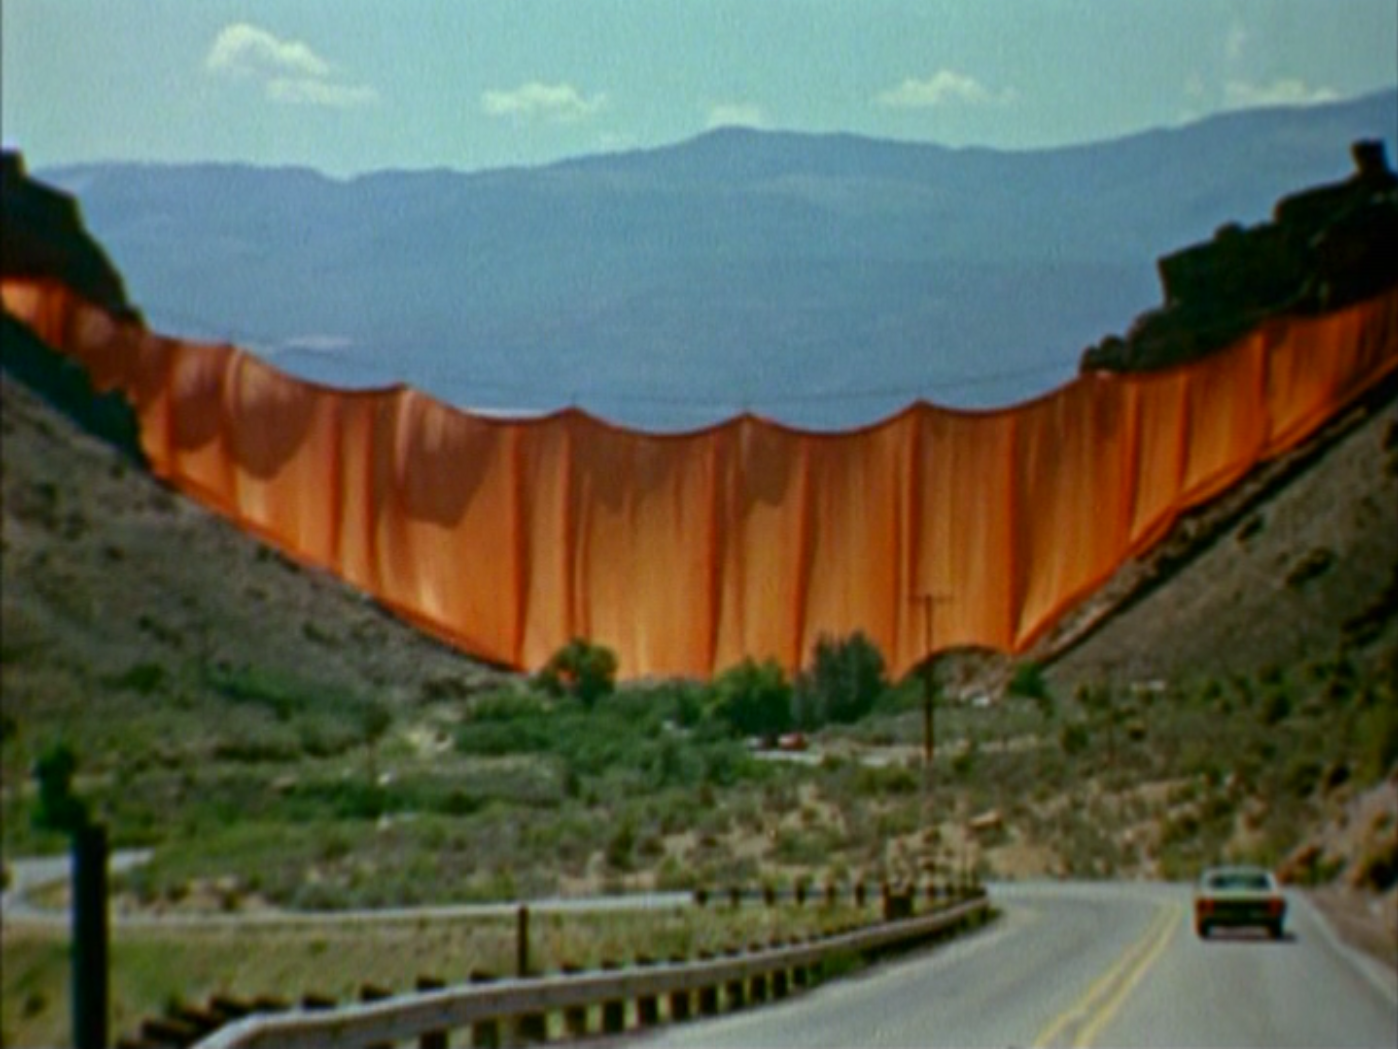 Christo's Valley Curtain | Film Review - Dinca